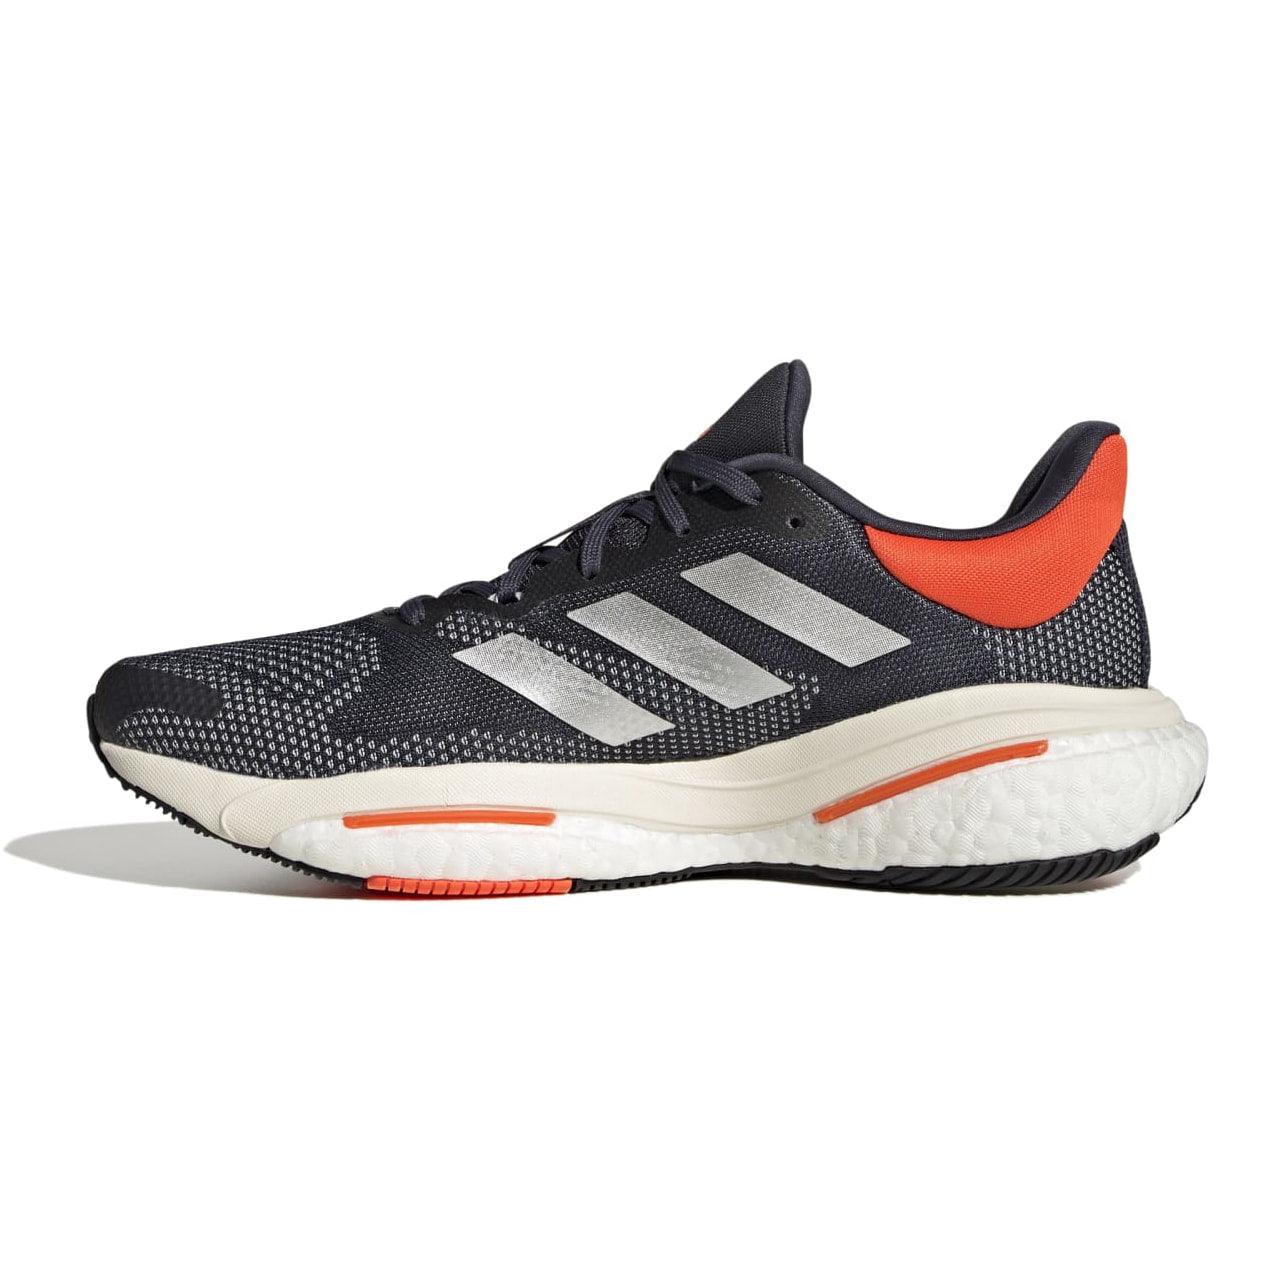 Adidas Solarglide 5 Men's - The Sweat Shop